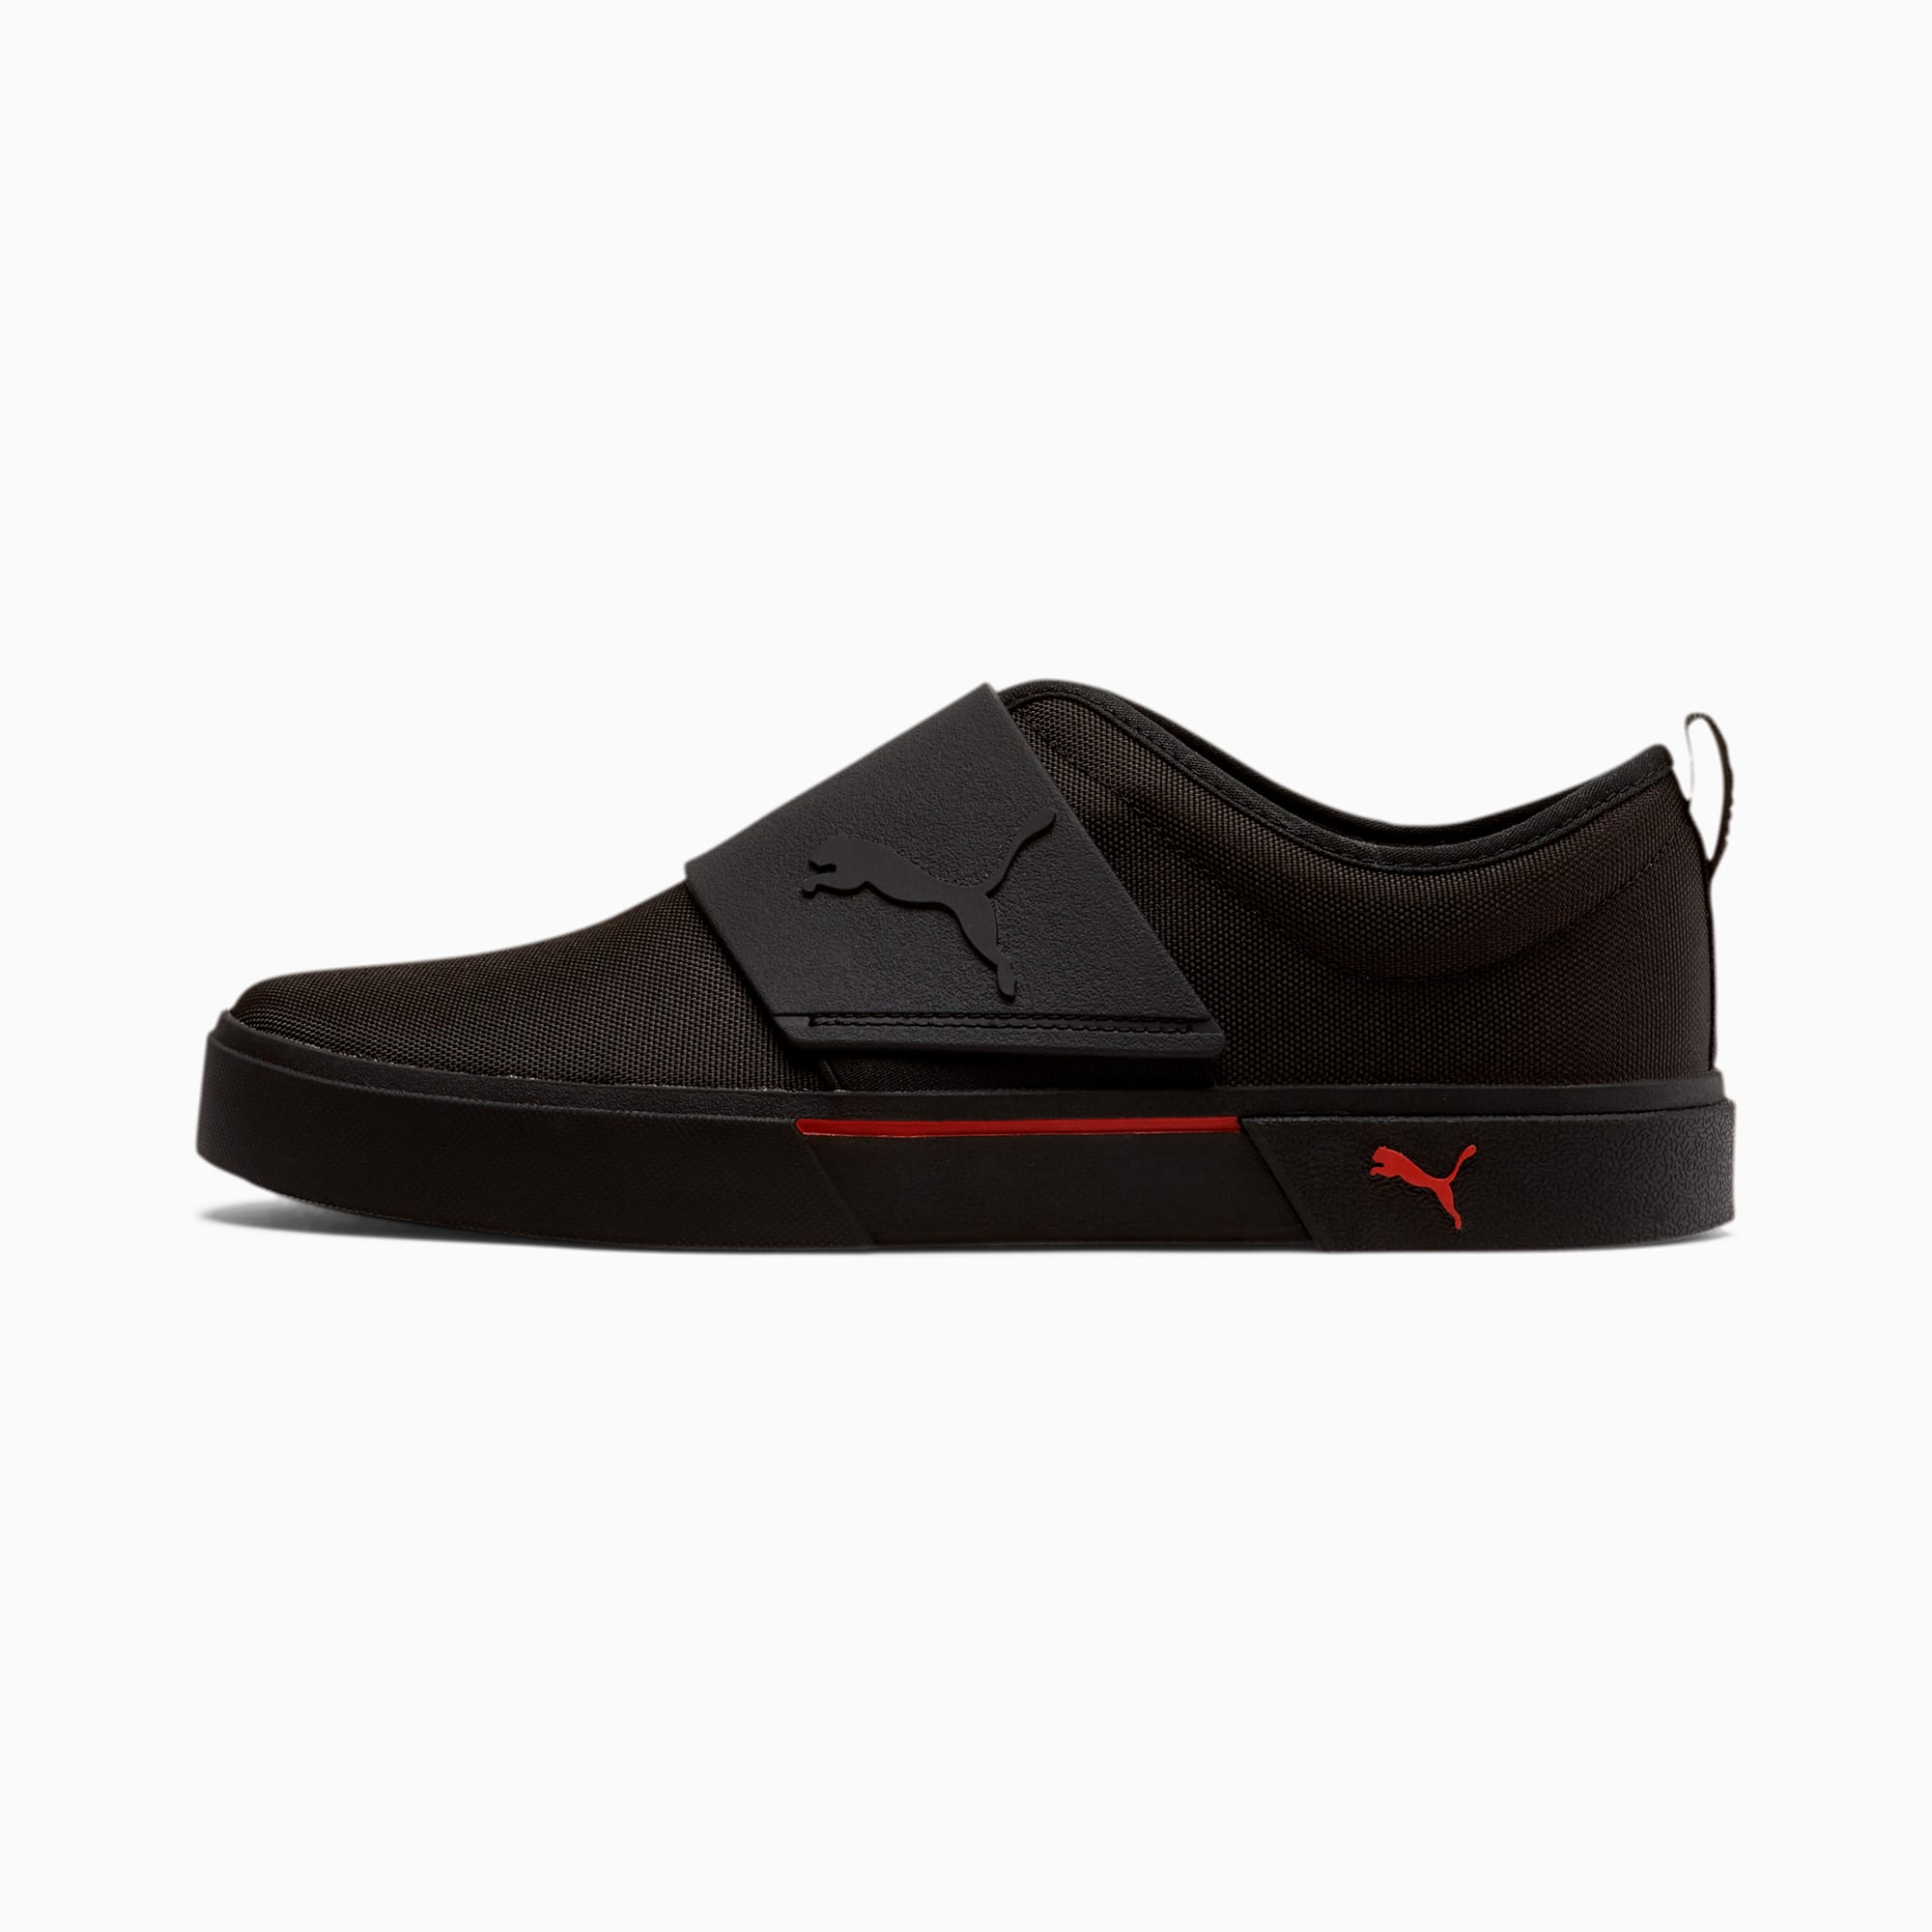 mens black casual slip on shoes